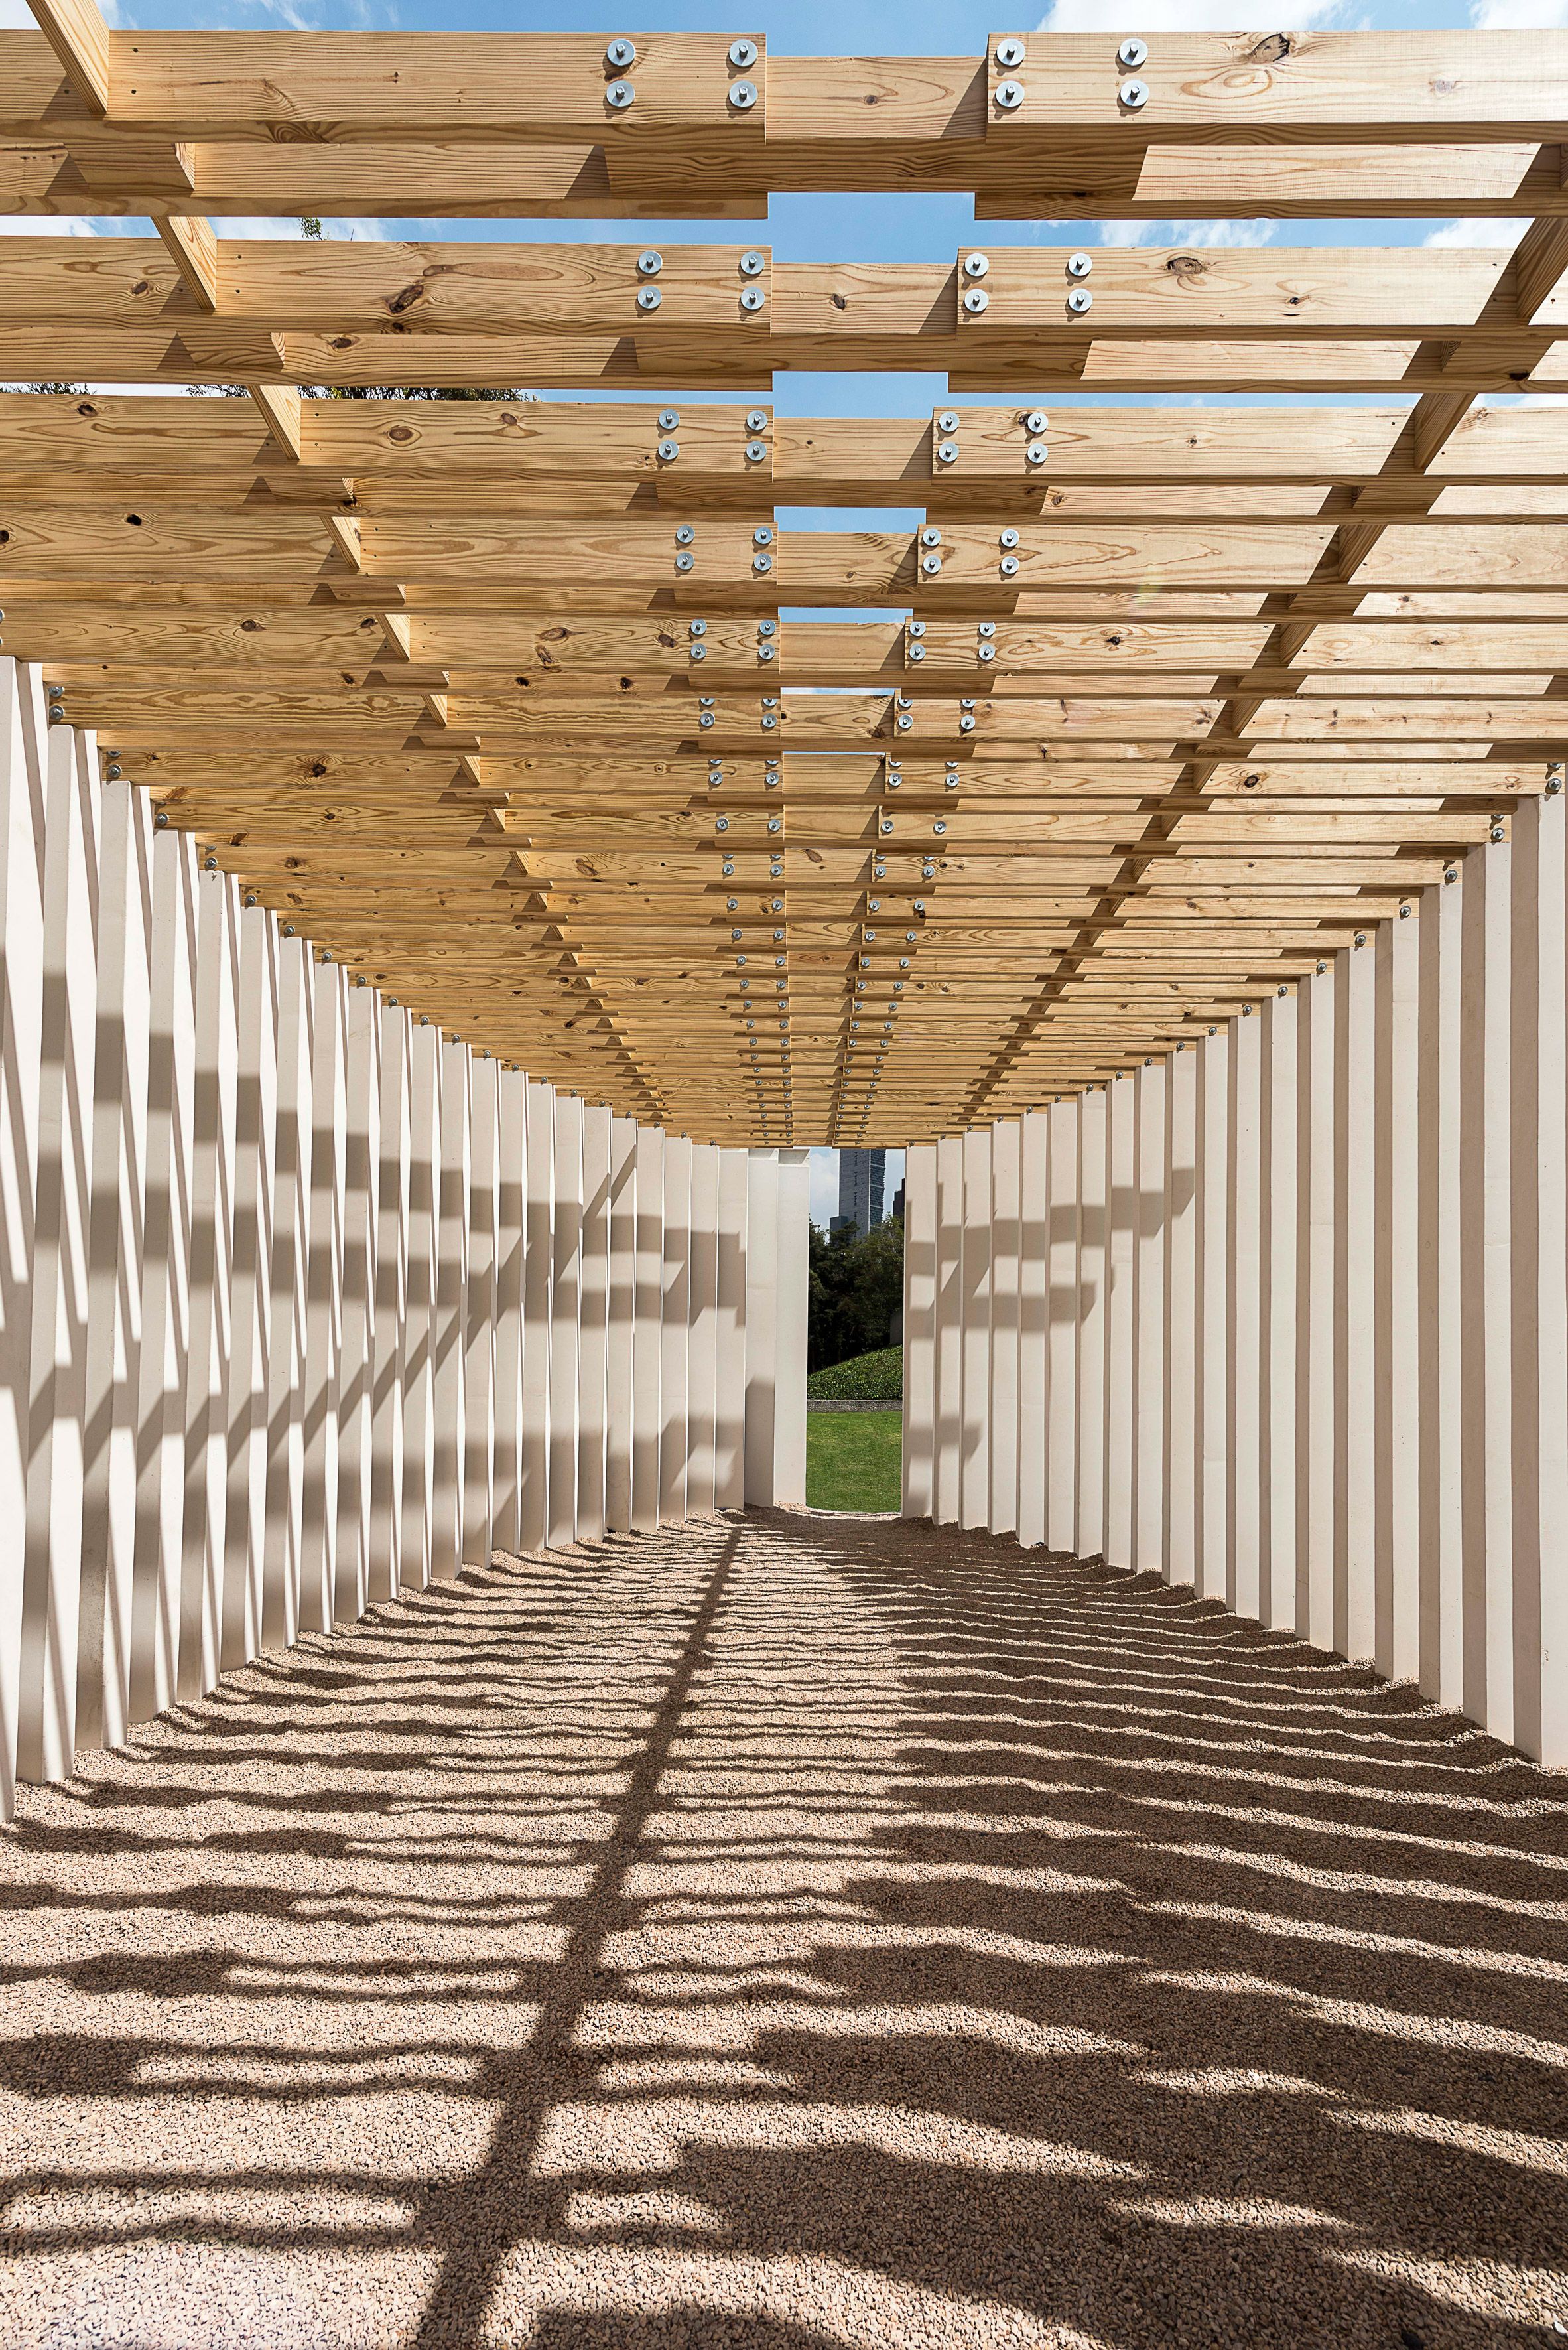 Materia's Design Week Mexico pavilion casts shadow patterns across ...